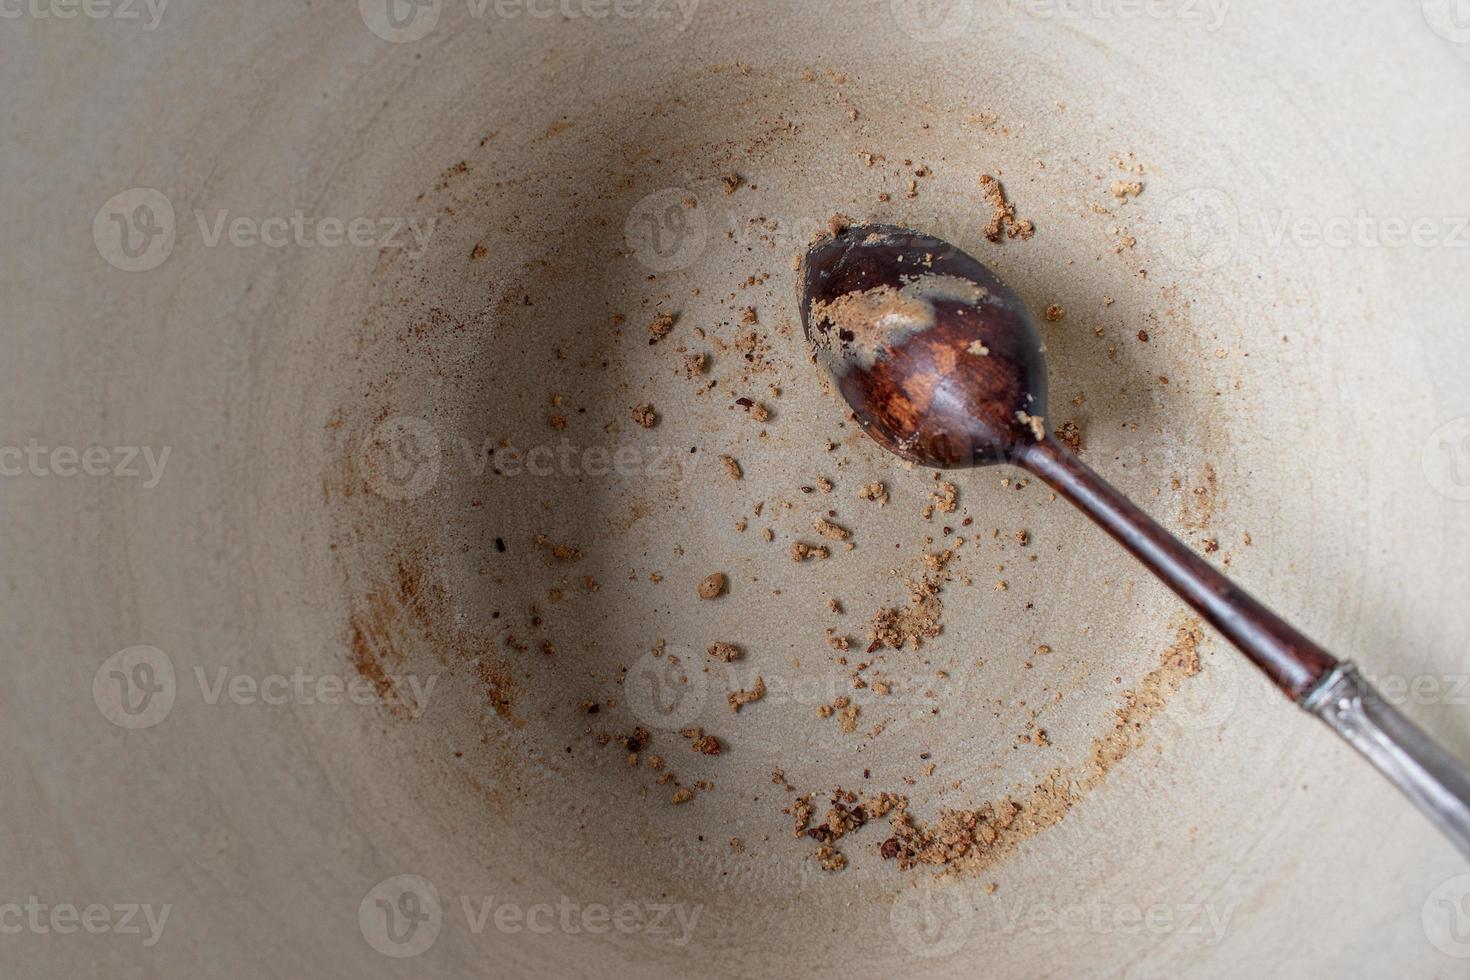 empty country crock bowl with wooden spoon and leftover crumbs flat lay photo